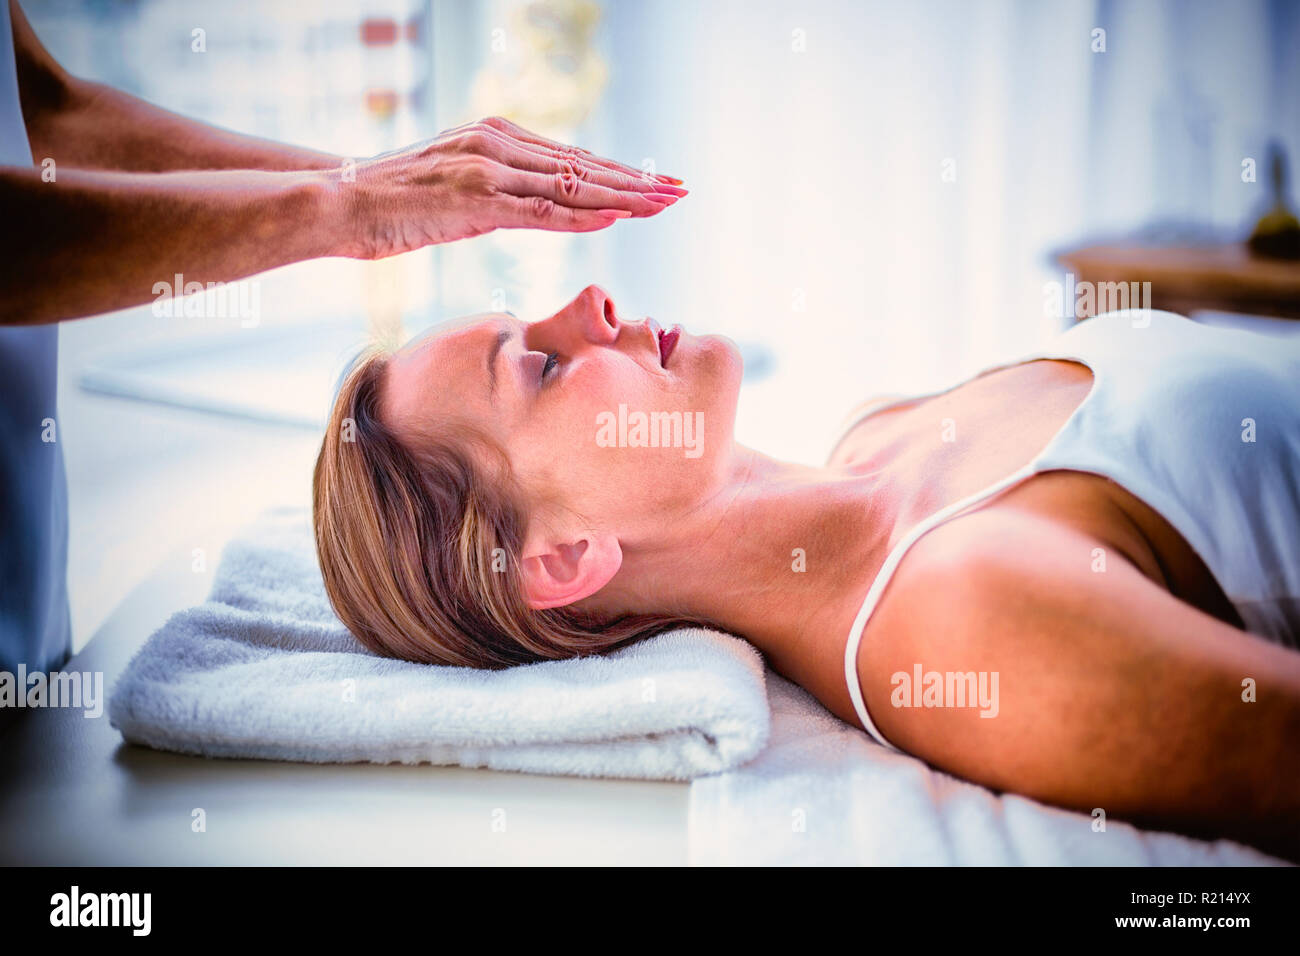 Cropped hands of therapist performing reiki on woman Stock Photo